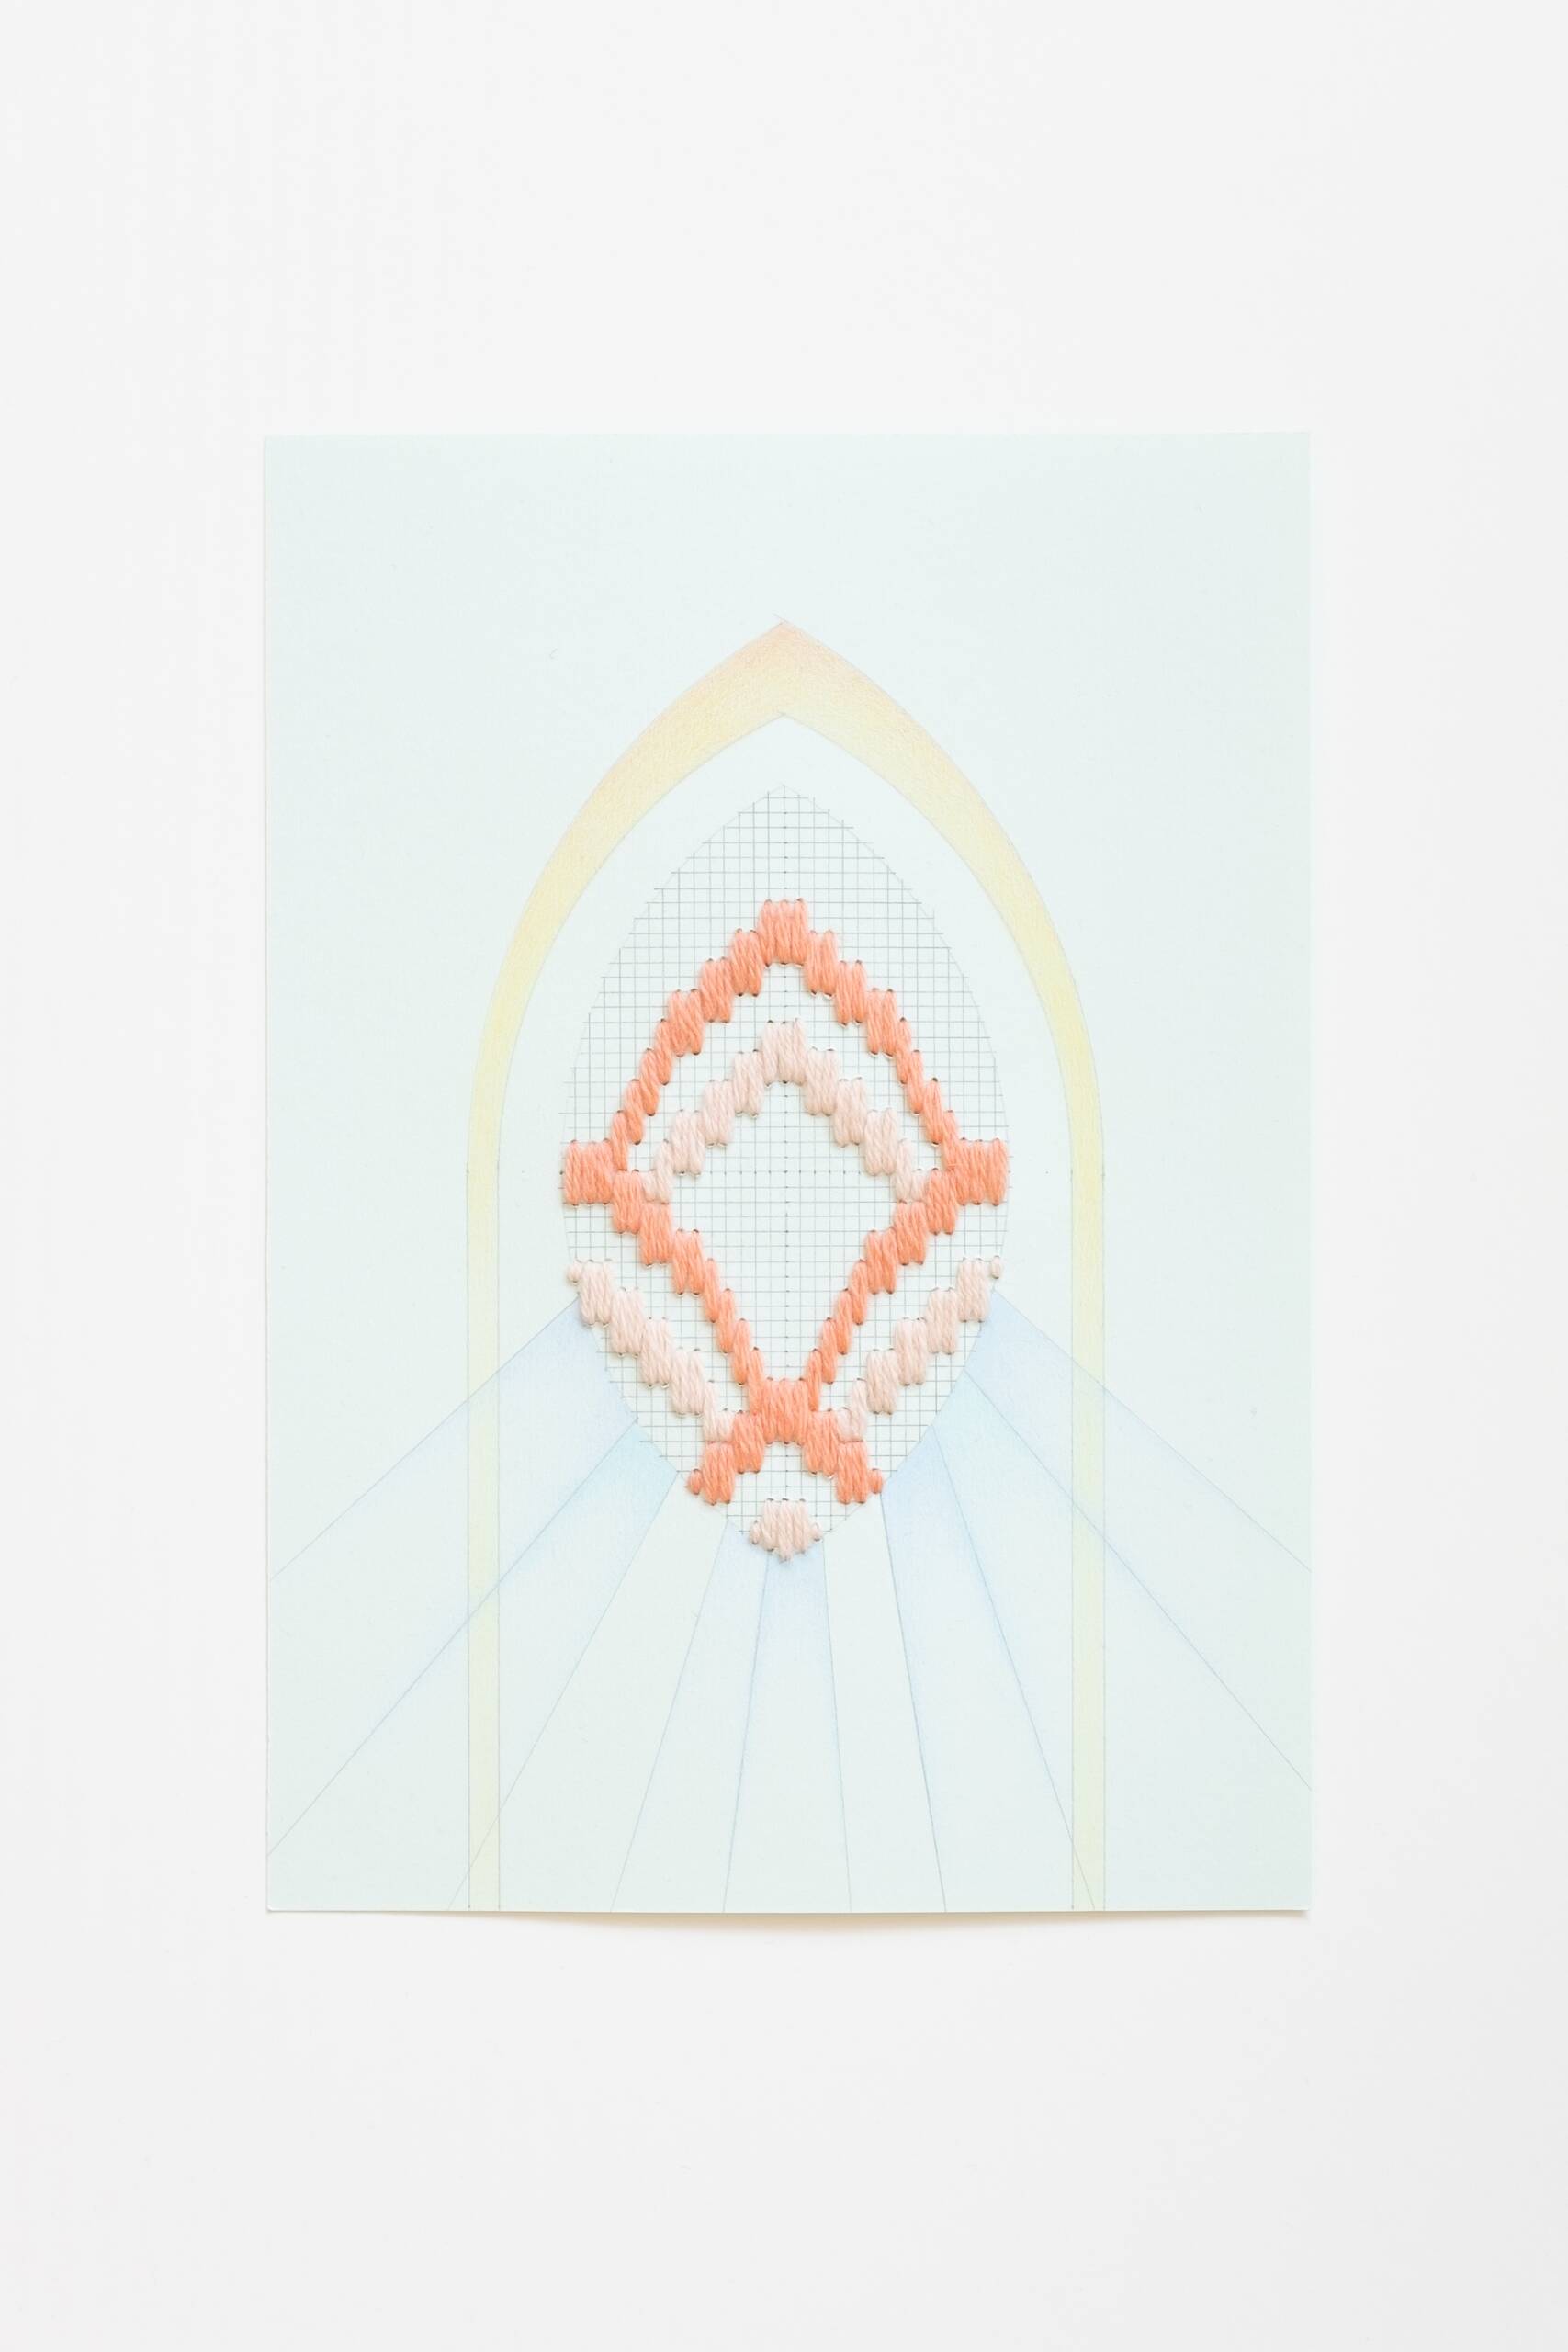 Bargello vesica piscis [peach on green], Hand-embroidered wool yarn, pencil and colored pencil on 170 gsm paper, 2021